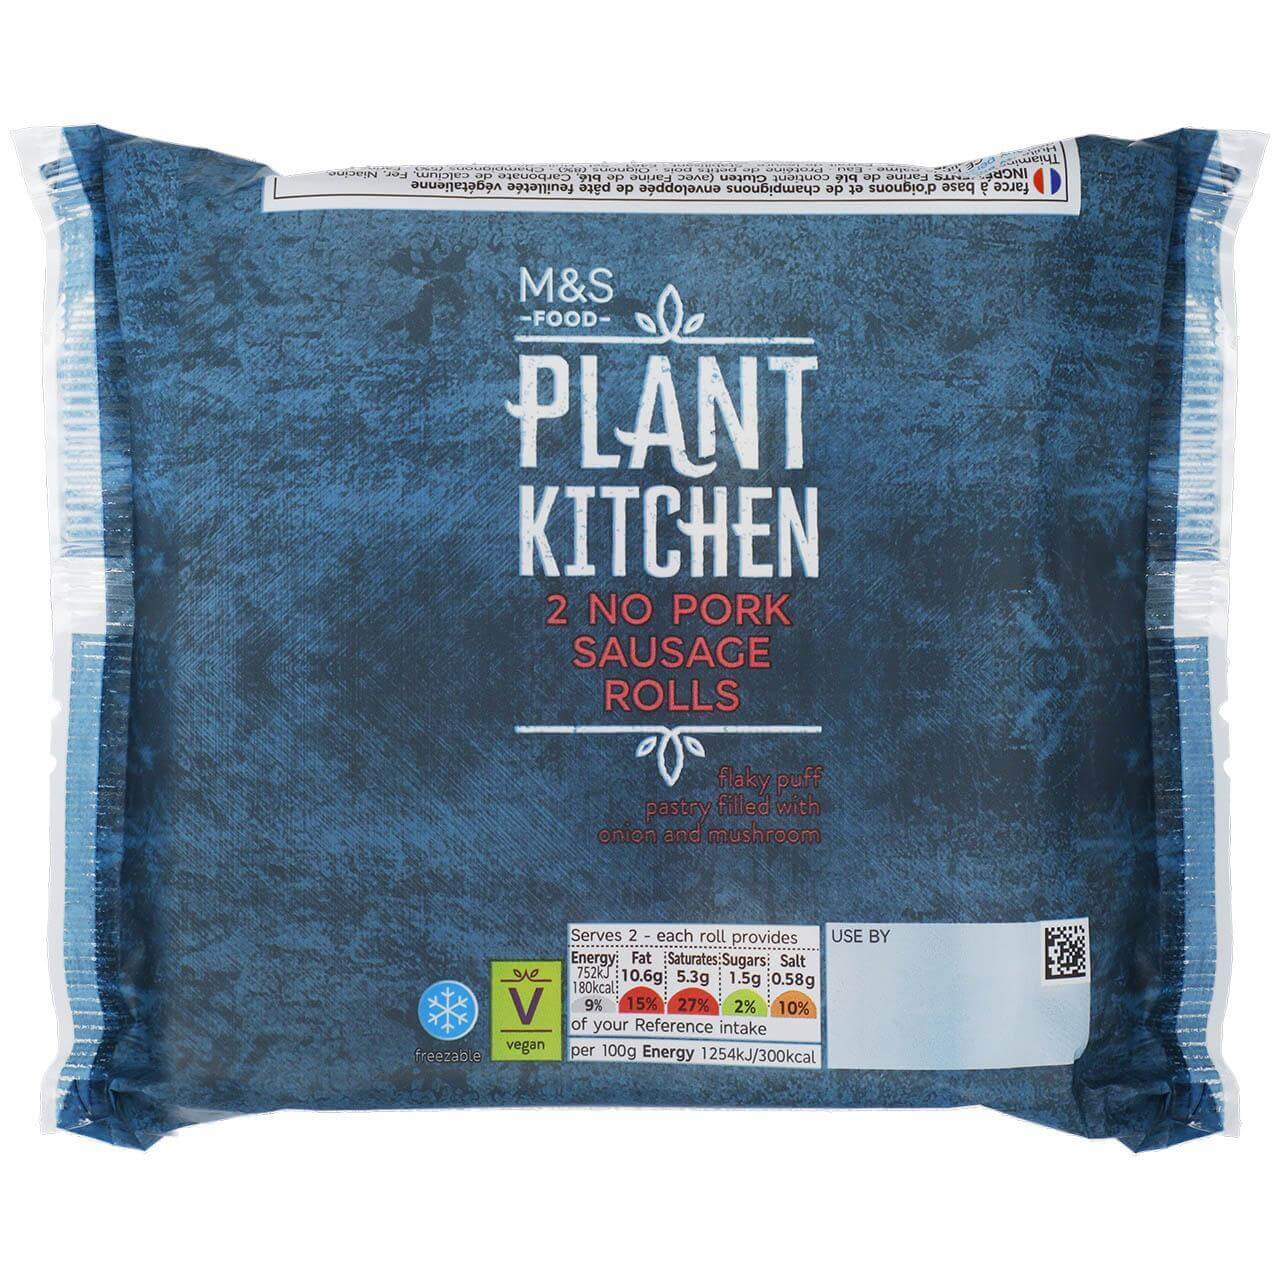 Image of M&S Plant Kitchen No Pork Sausages made in the UK by Marks & Spencer Food. Buying this product supports a UK business, jobs and the local community